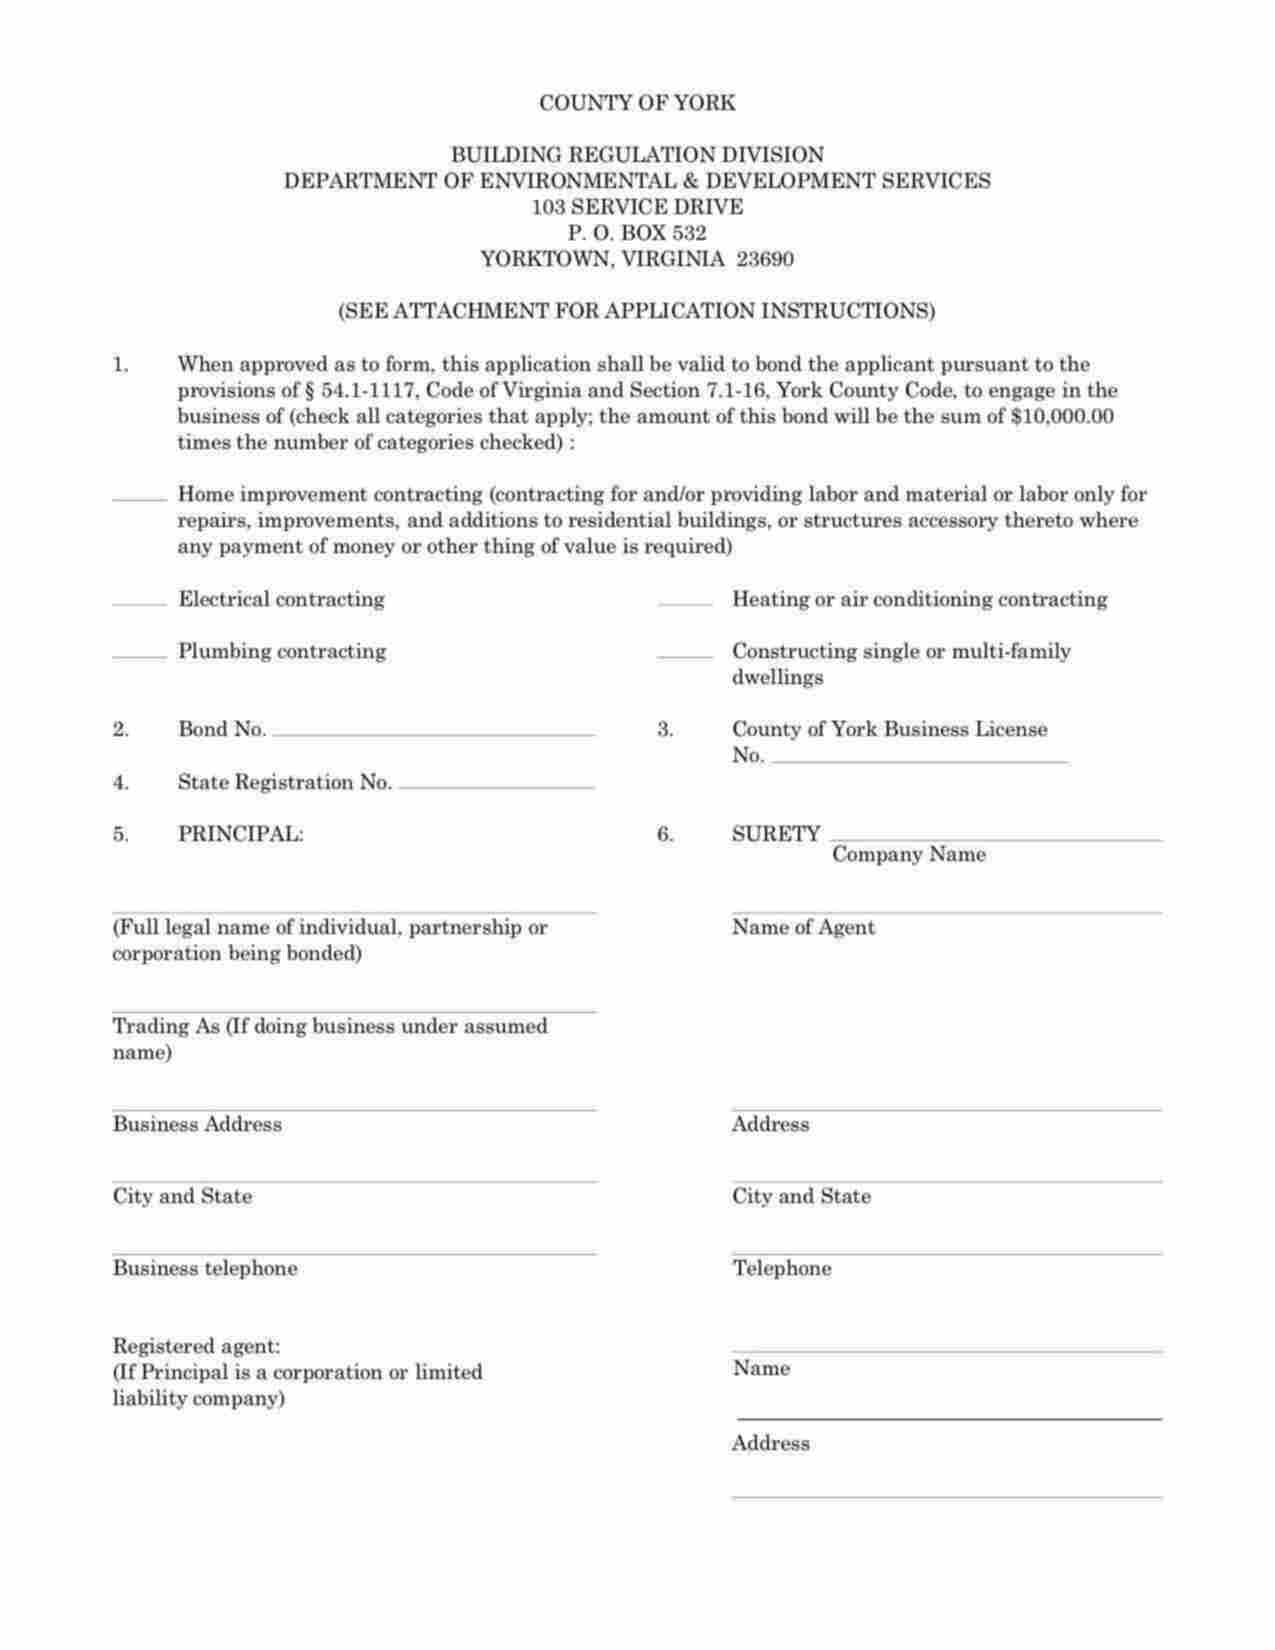 Virginia Electrical Contracting Bond Form